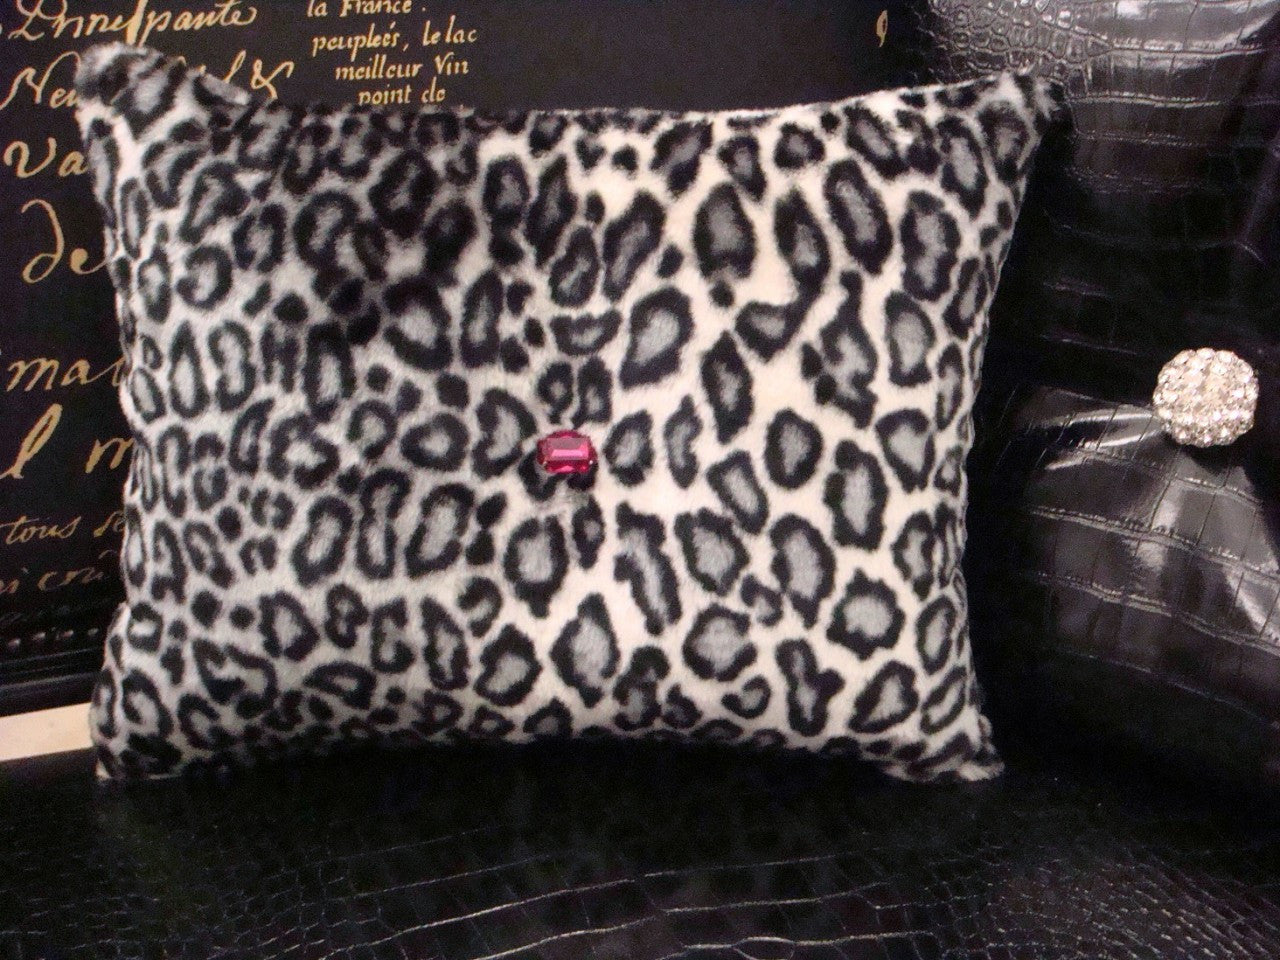 Snow Leopard Bling Throw Pillow, Black & White 15 x 12 with a pink faux crystal